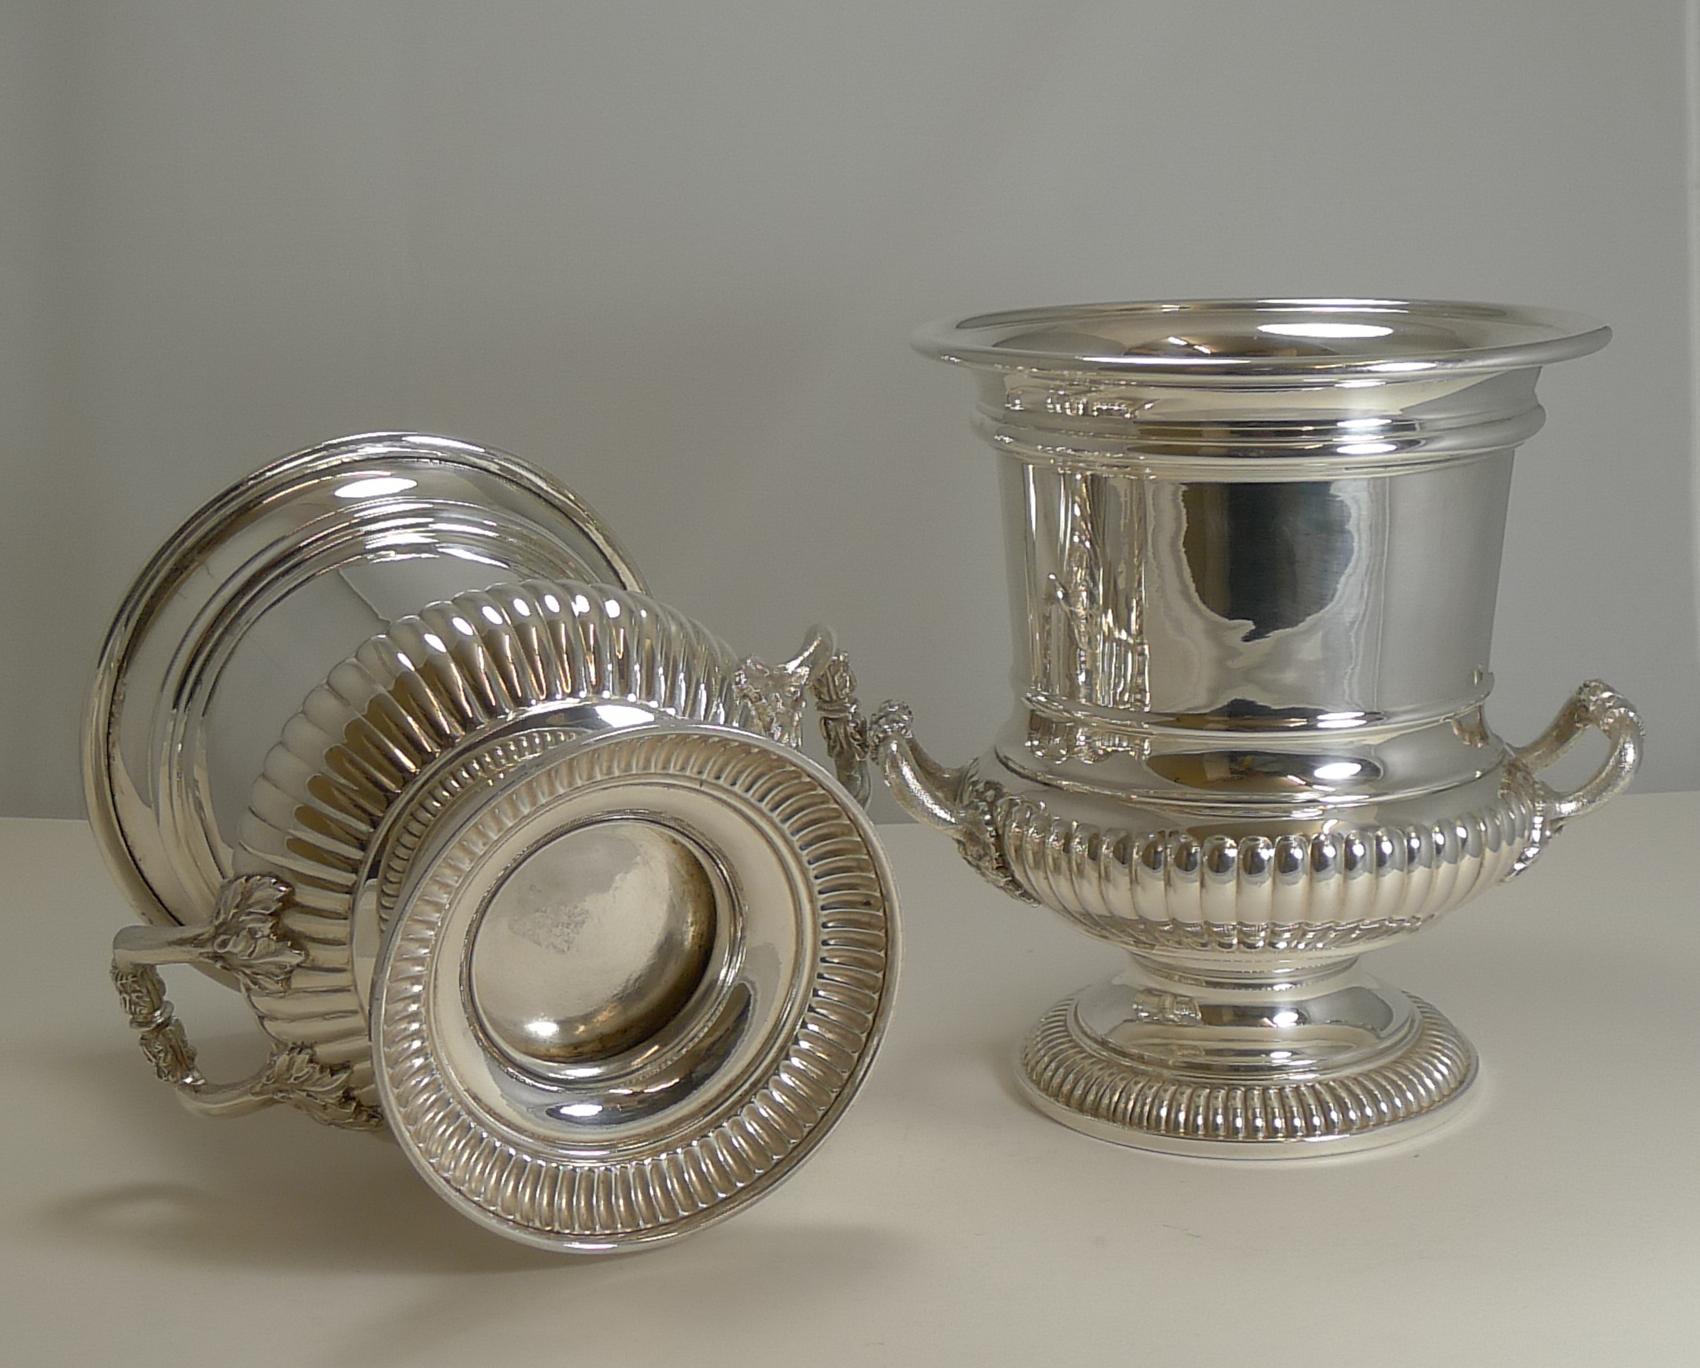 Early 20th Century Large Pair of Antique English Silver Plated Wine / Champagne Coolers, circa 1910